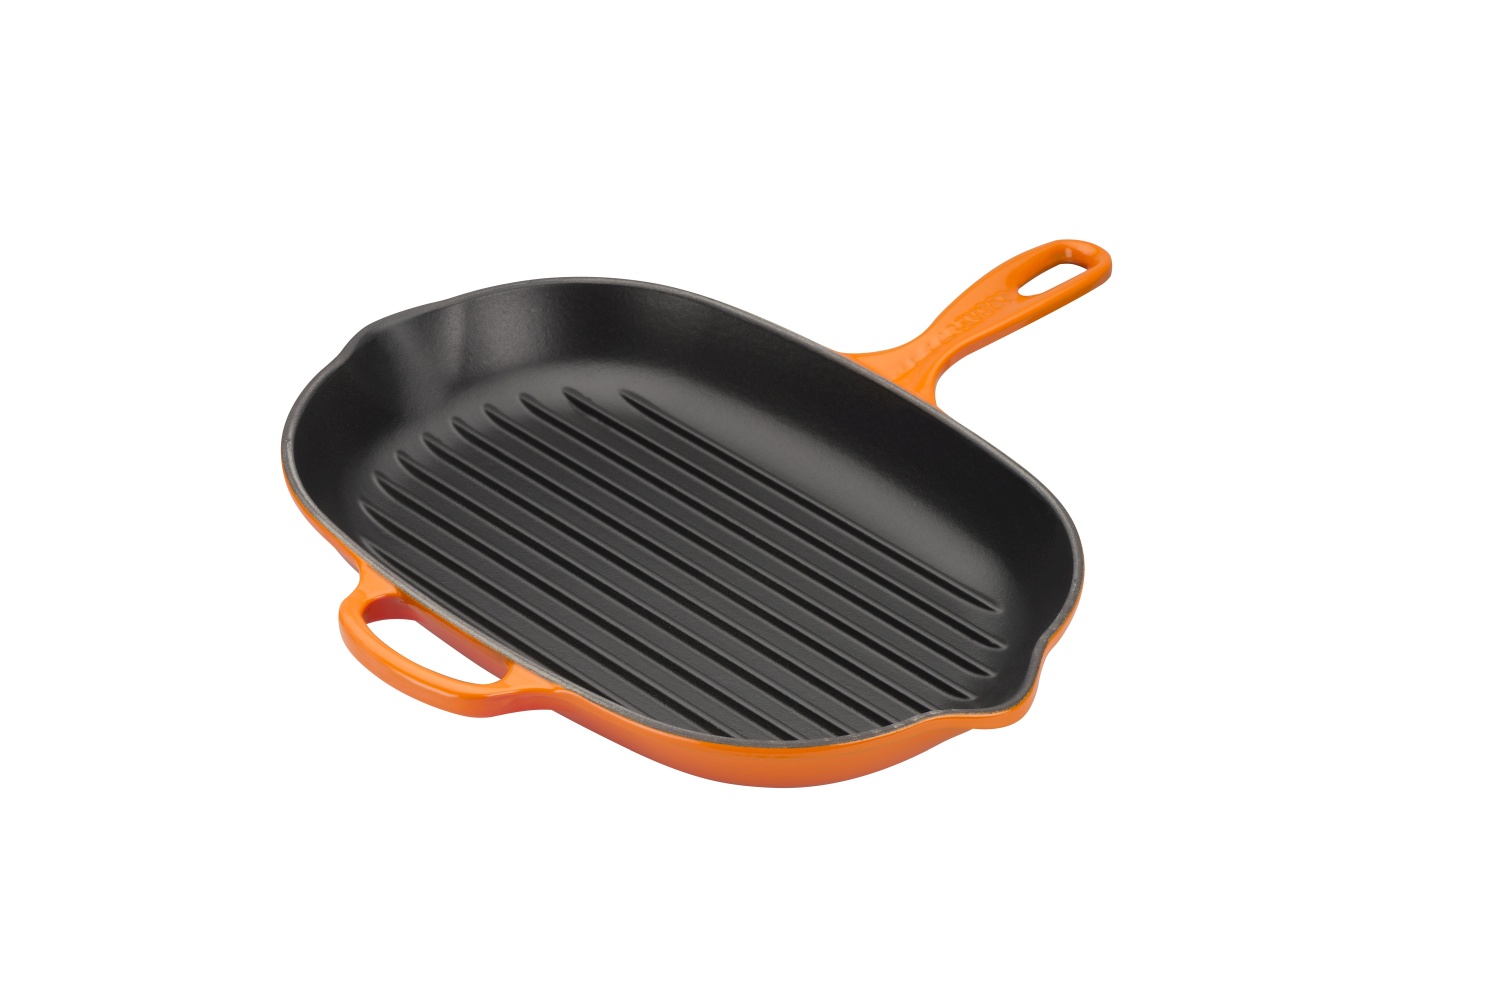 Grillpfanne Oval 32 cm Ofenrot Gusseisen Signature  Le Creuset